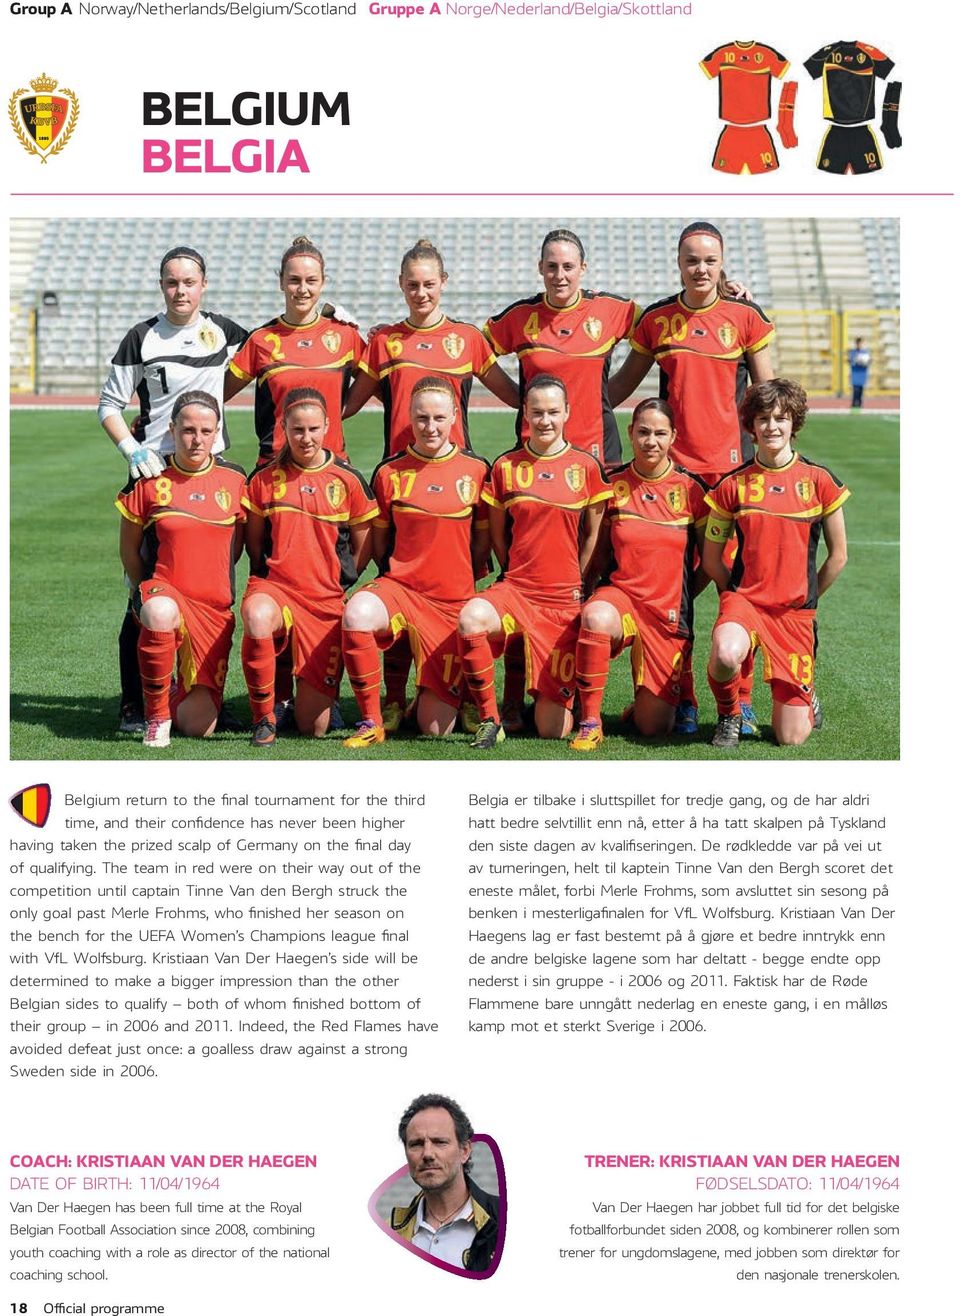 The team in red were on their way out of the competition until captain Tinne Van den Bergh struck the only goal past Merle Frohms, who finished her season on the bench for the UEFA Women s Champions